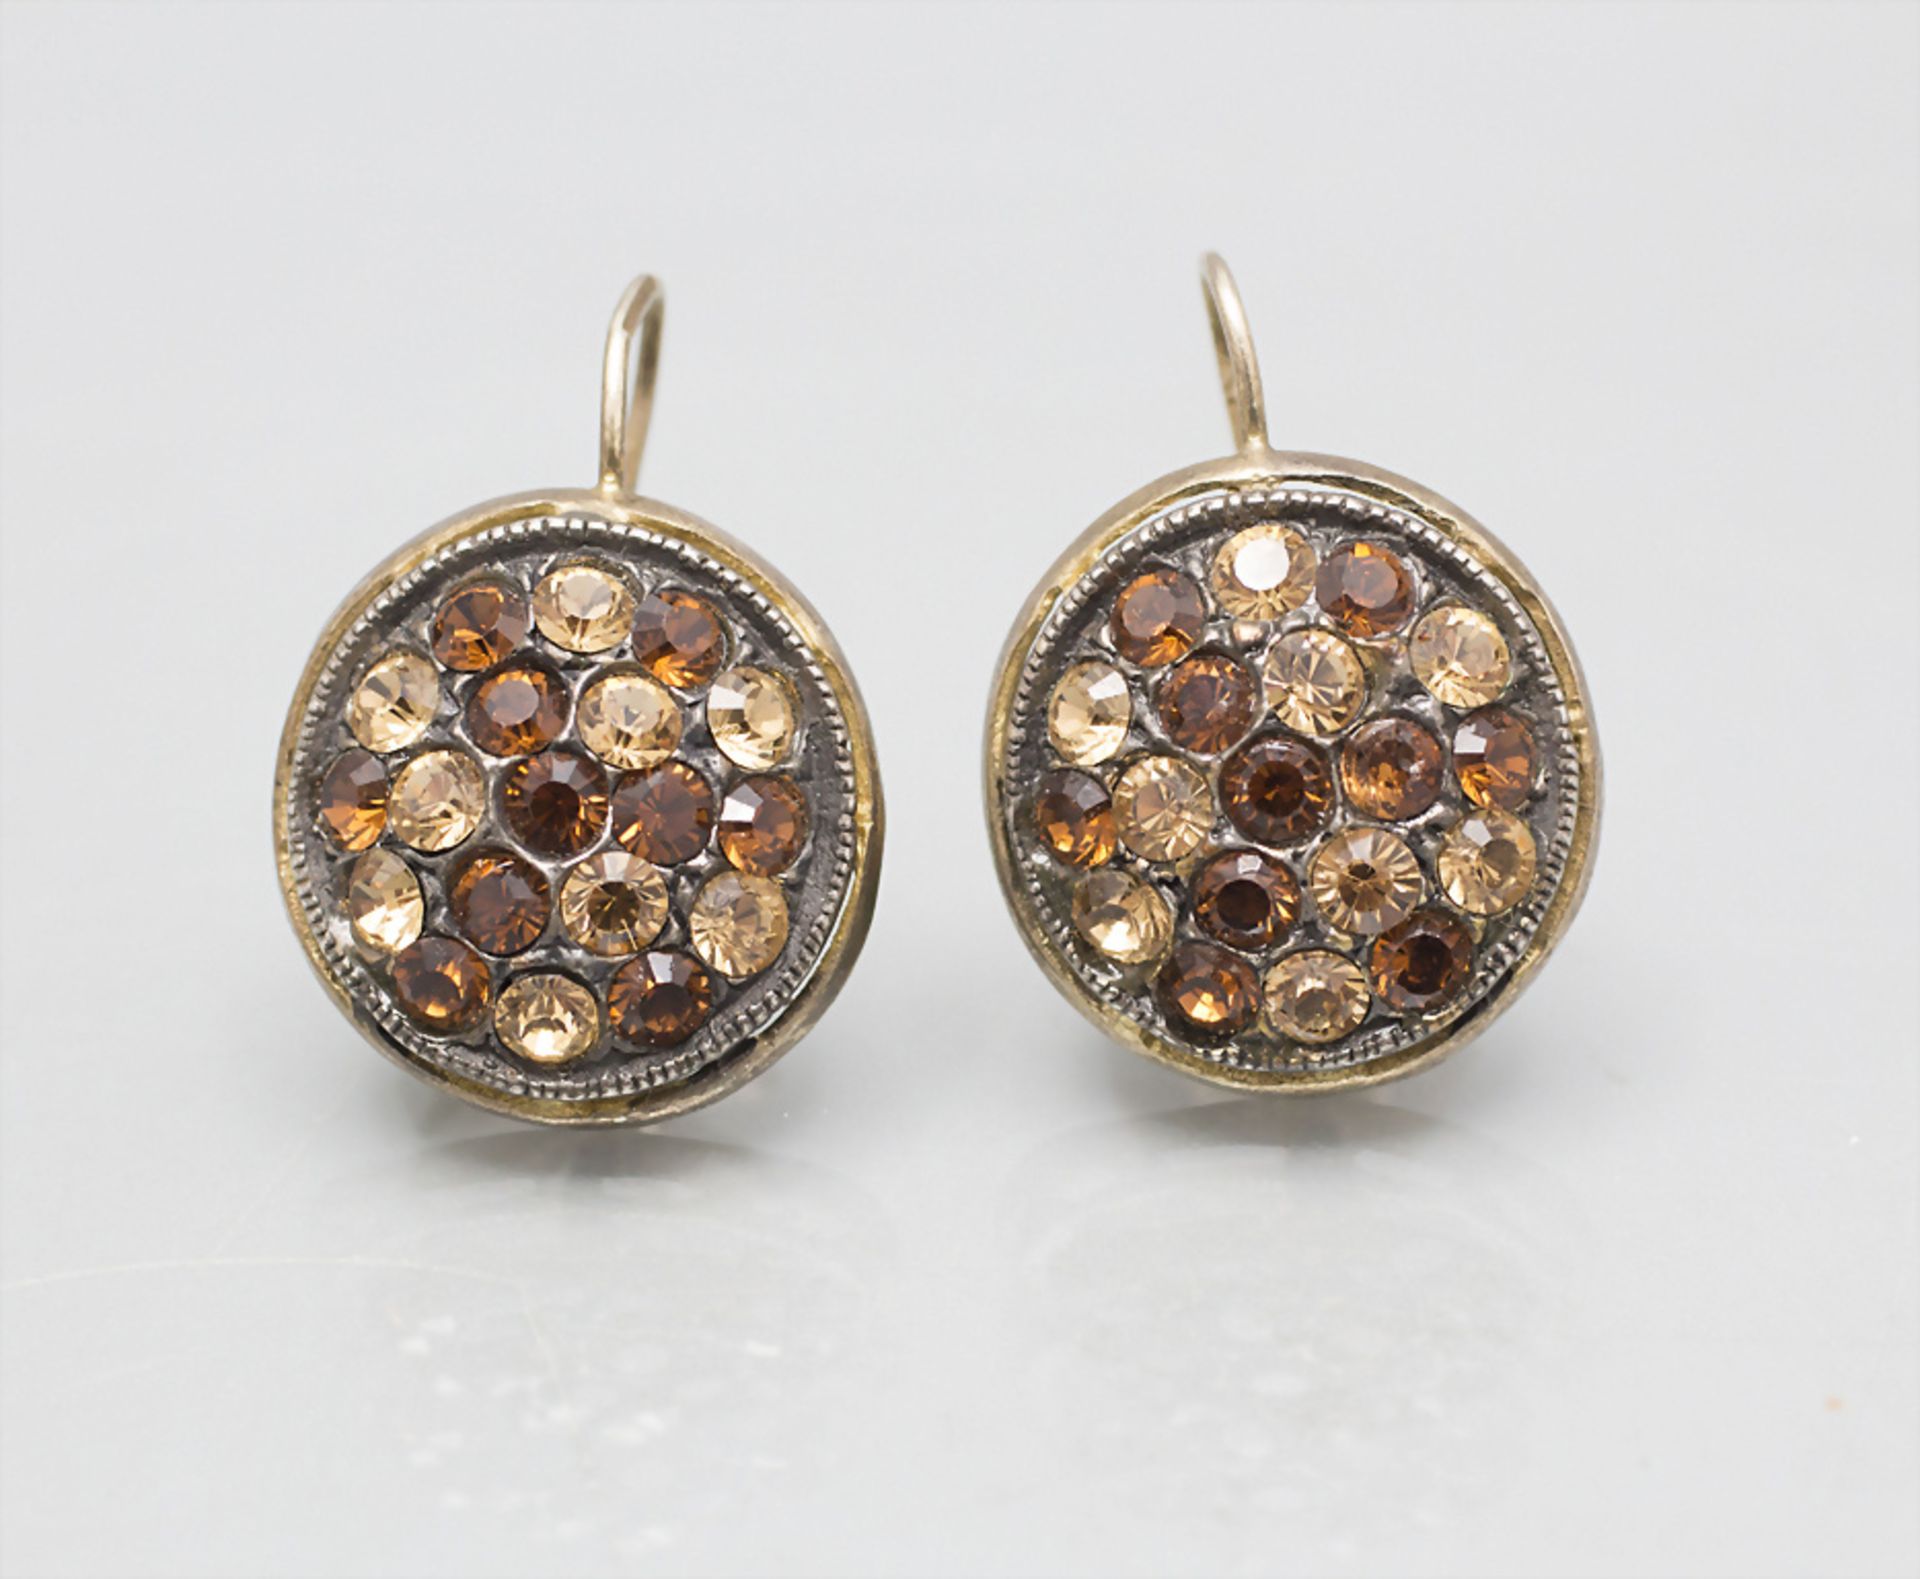 Paar Vintage Silber Ohrhänger mit Steinbesatz / A pair of silver earrings with amber colored stones